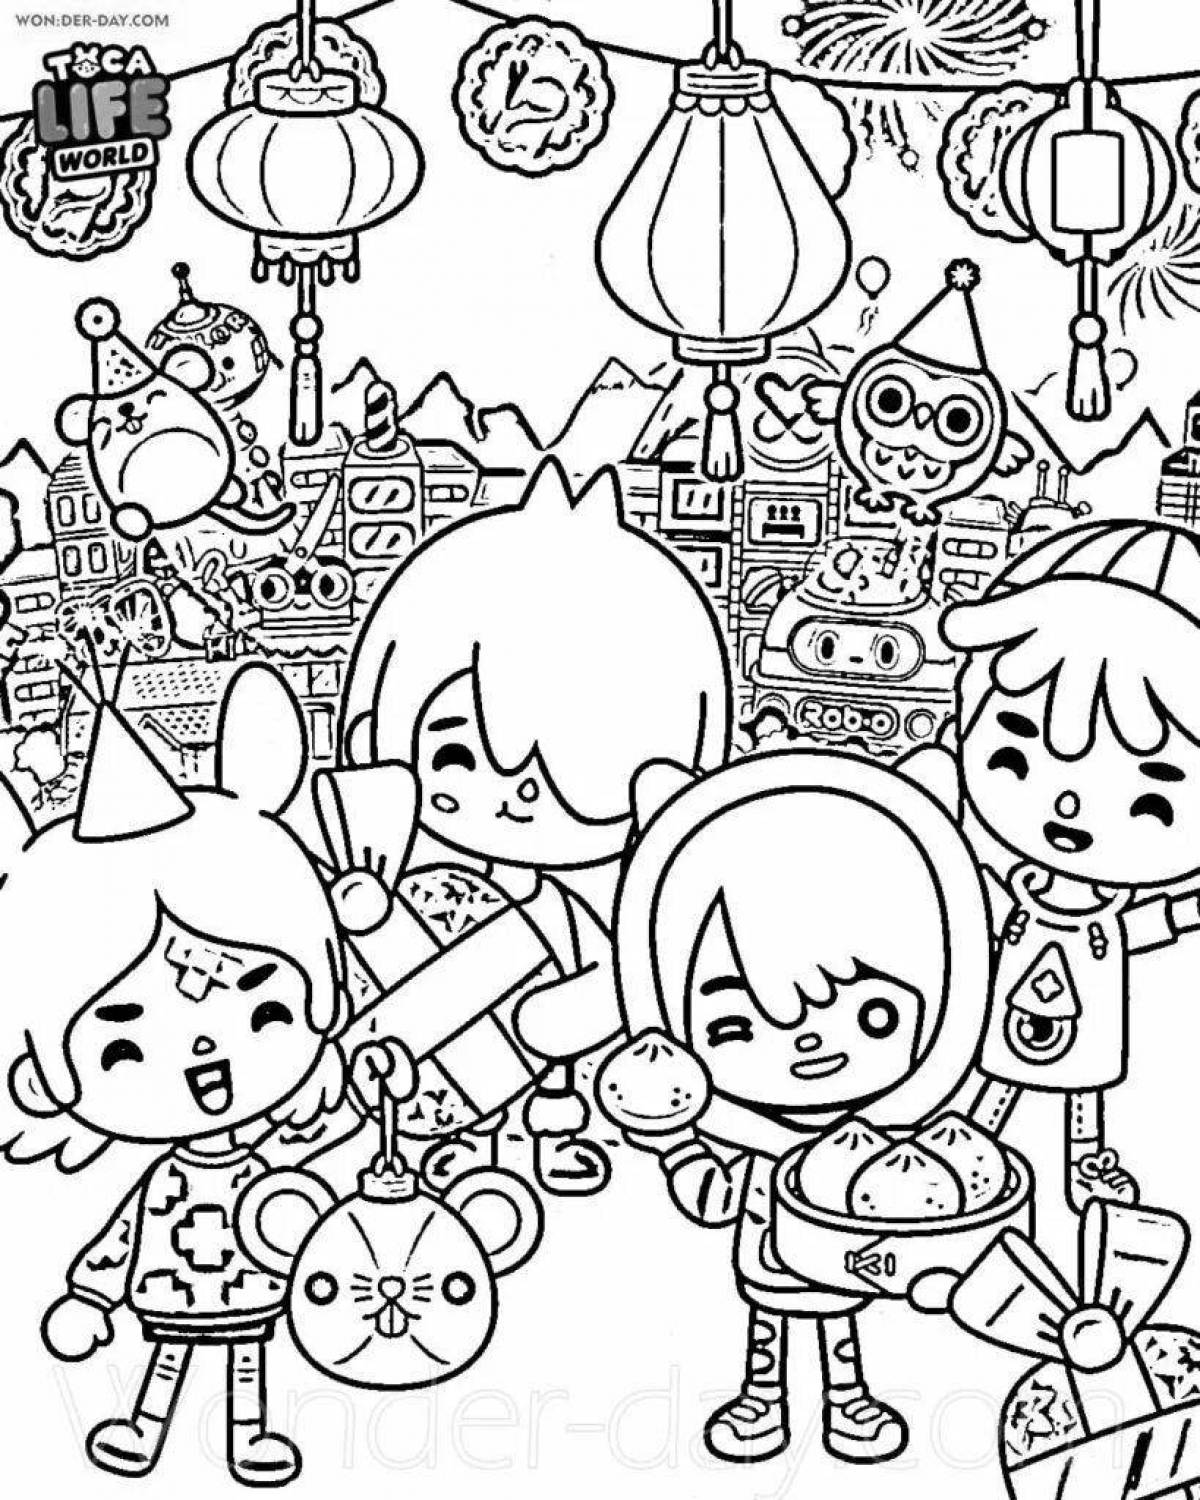 Exciting Boca city coloring book